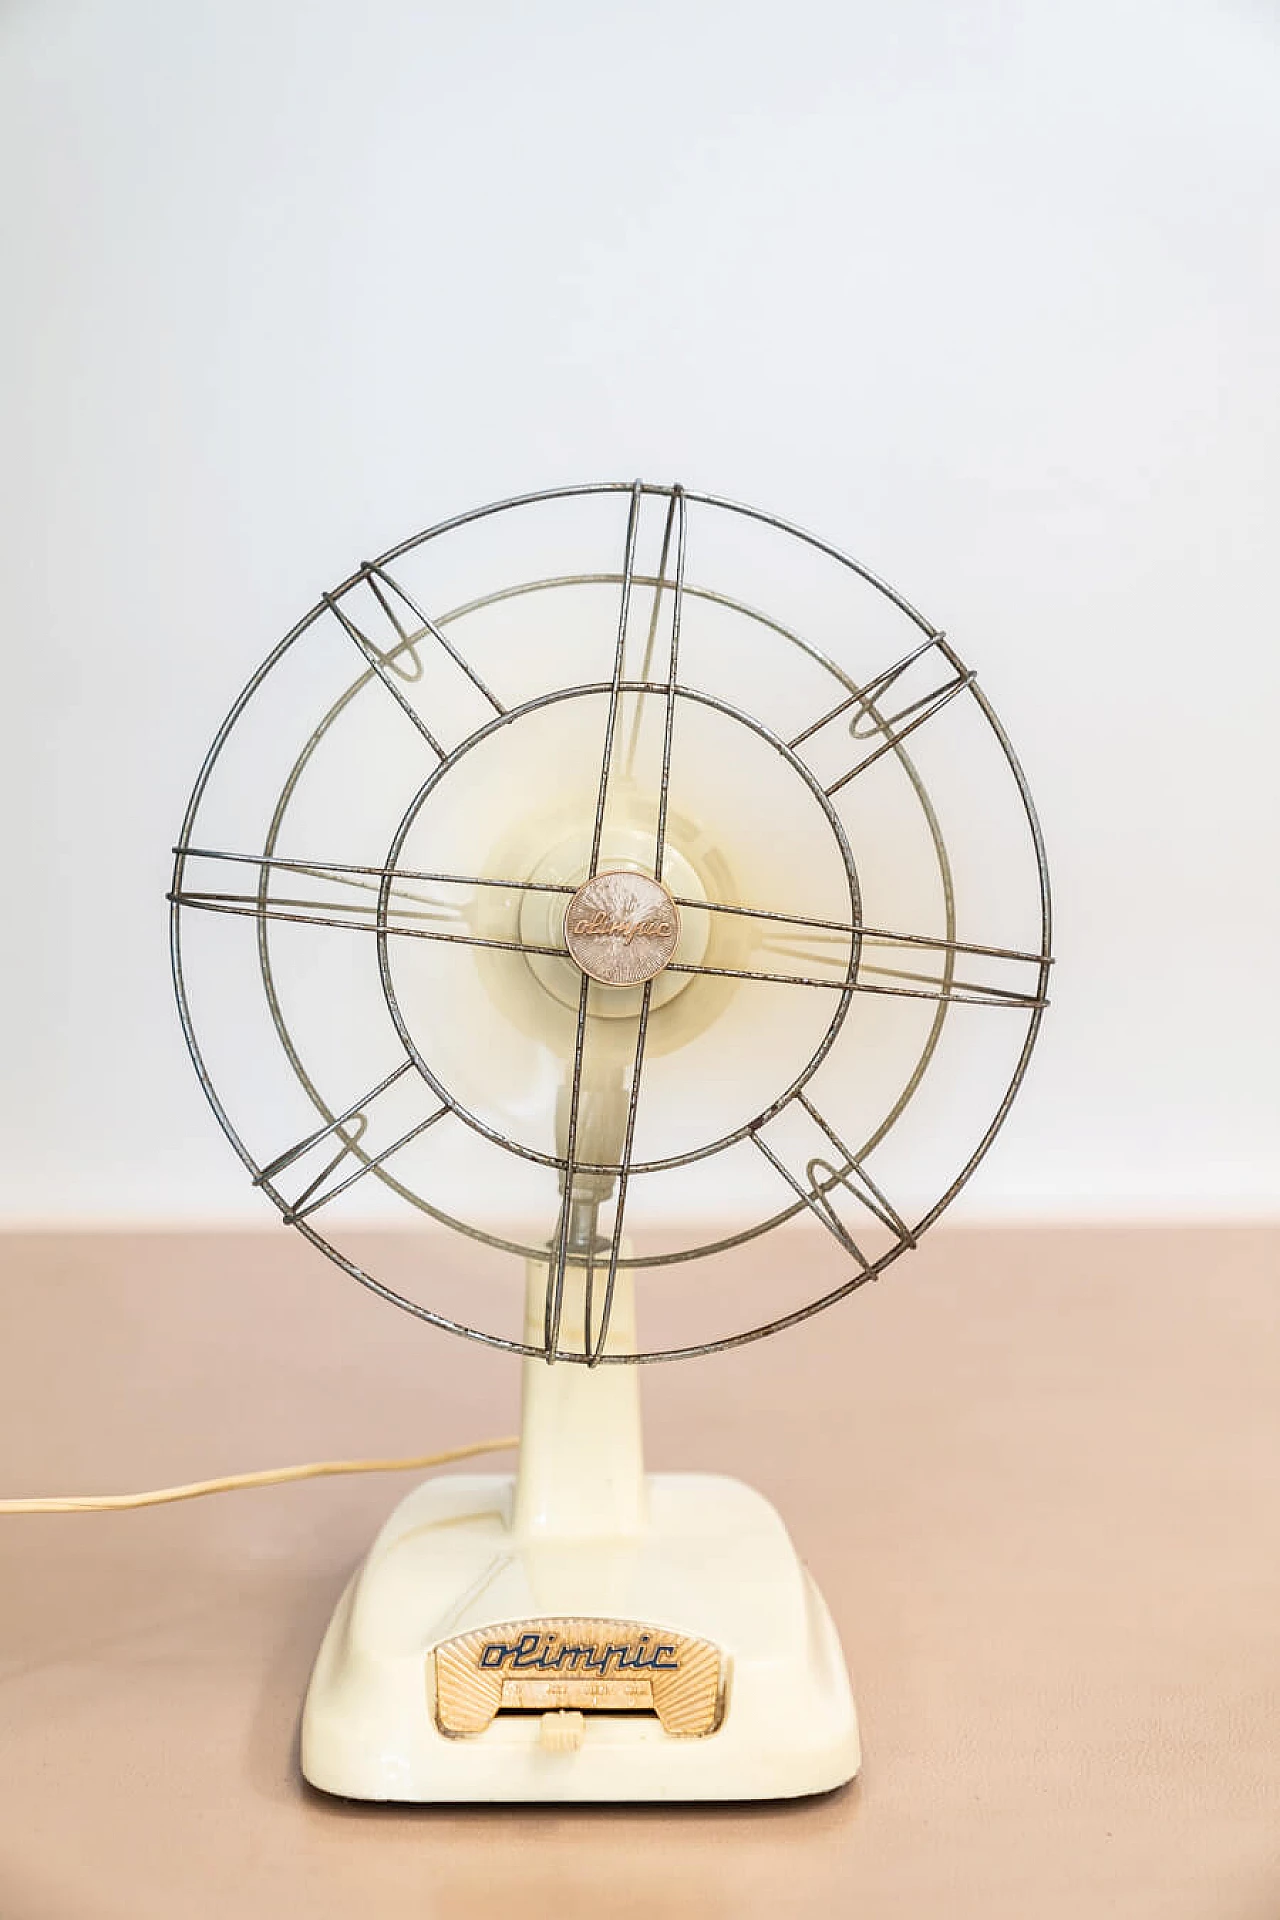 Olympic metal and plastic fan, 1970s 12